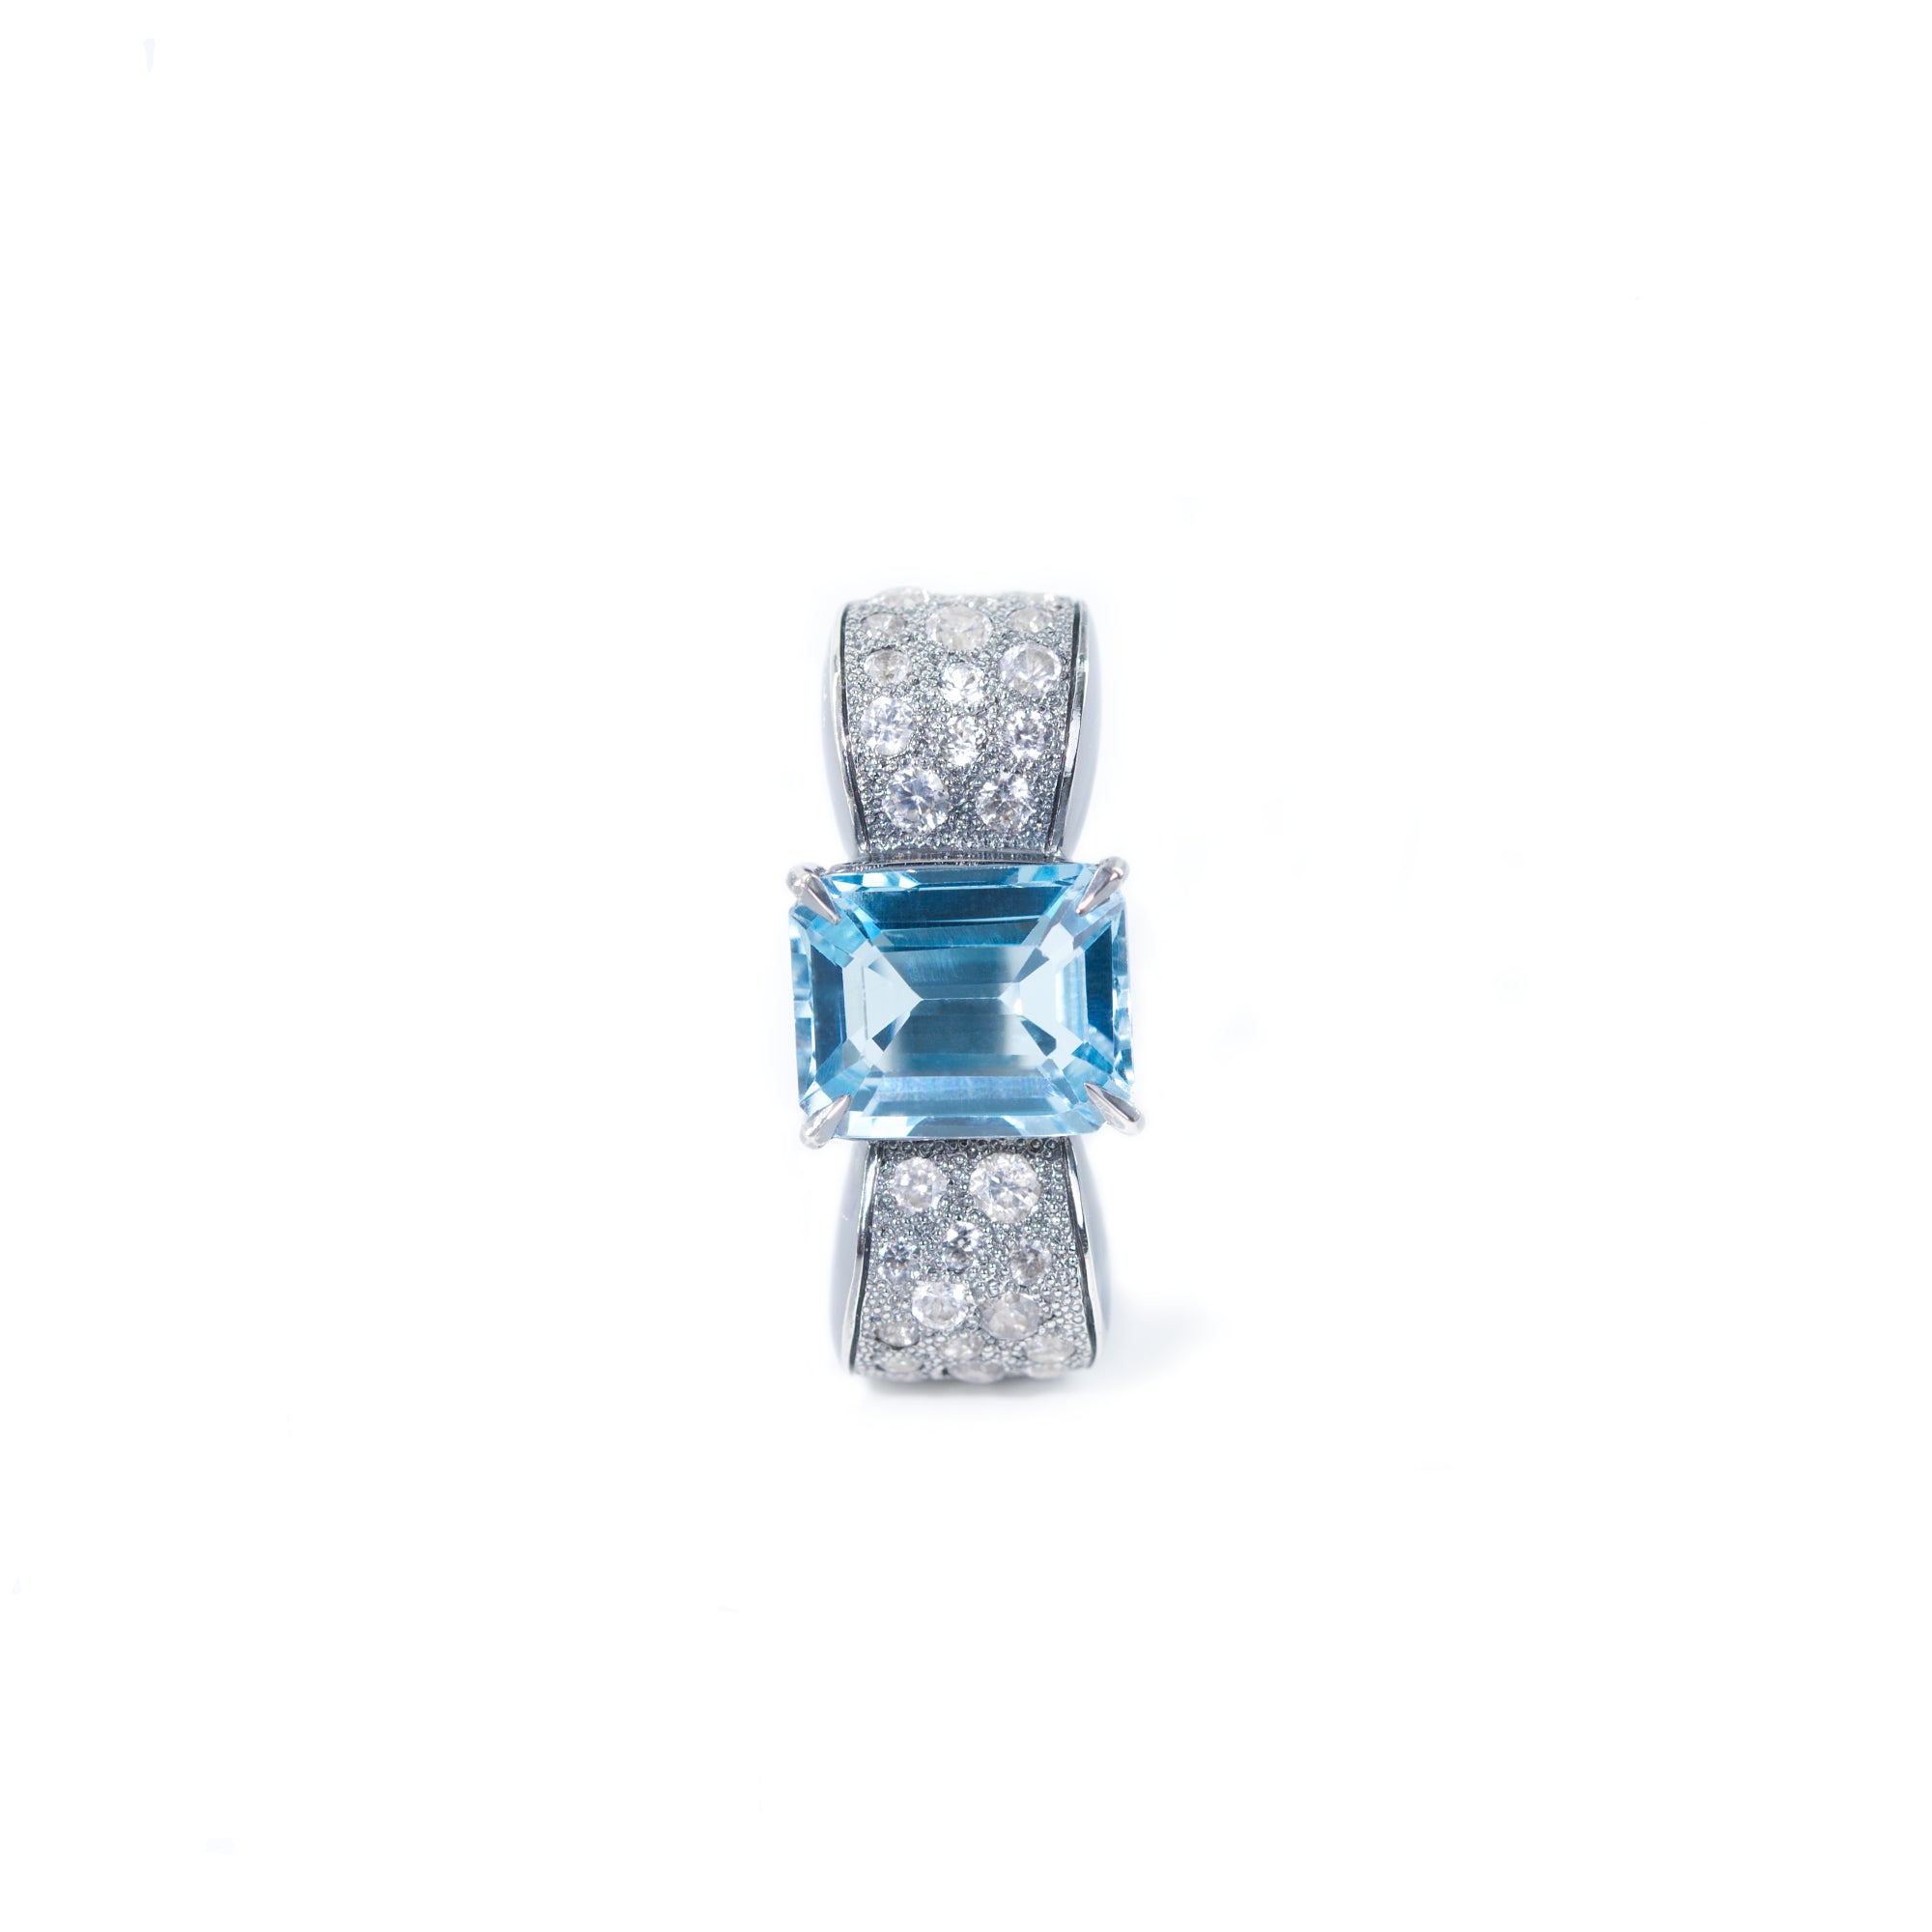 The photo shows the front view of the bow-shaped ring. In the center of the bow there is an octagonal blue topaz, the sides of the bow are decorated with round white zircons. The design of the ring is in the classic Art Deco style.